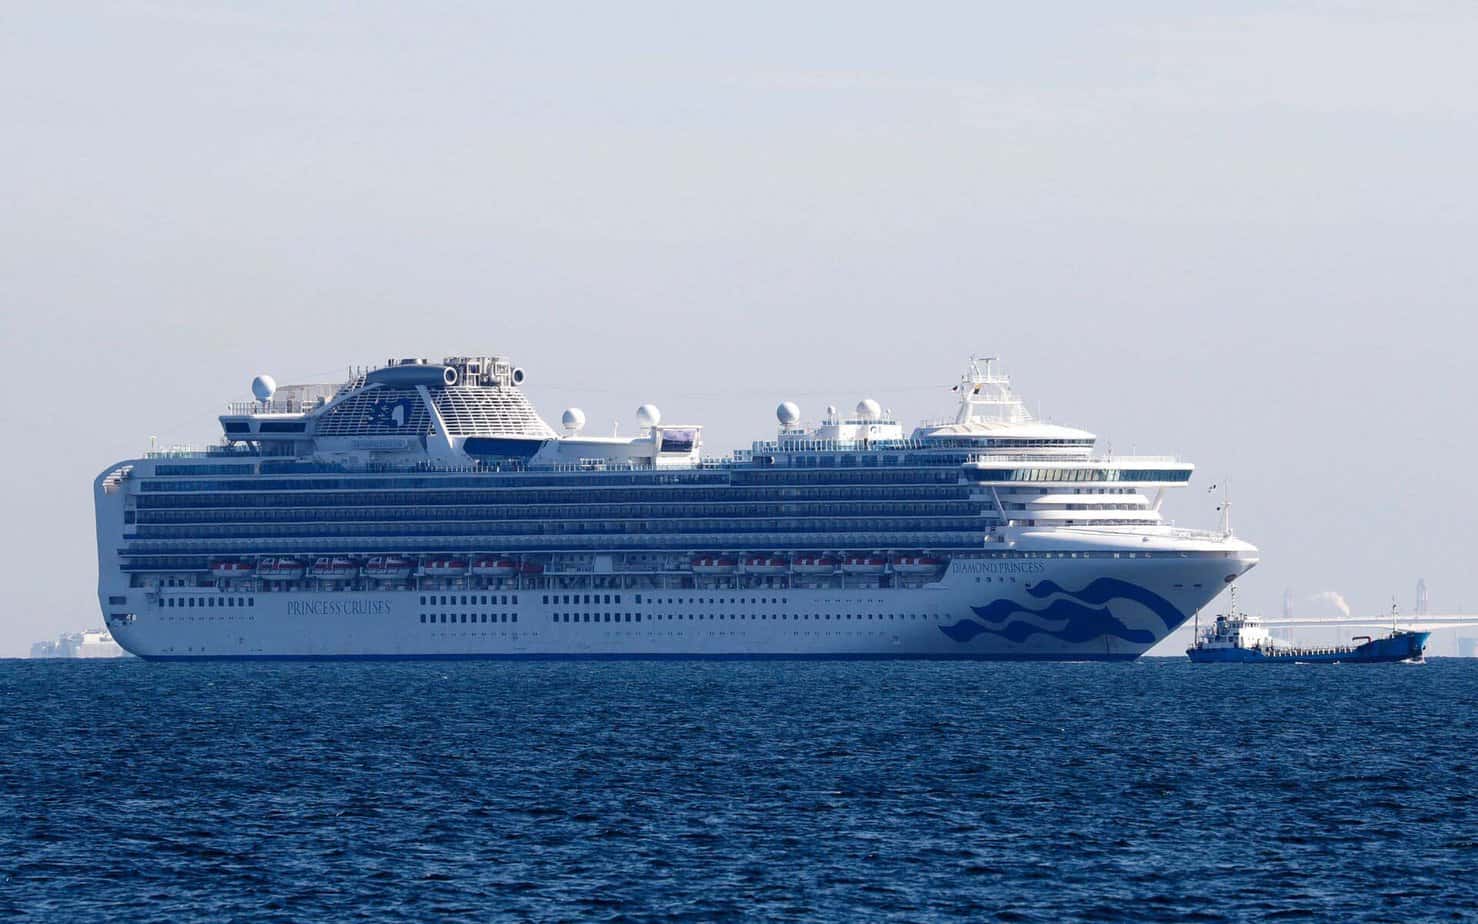 US URGES PEOPLE TO STAY OFF CRUISE SHIPS - Mounting concern for cruise ships with COVID on board